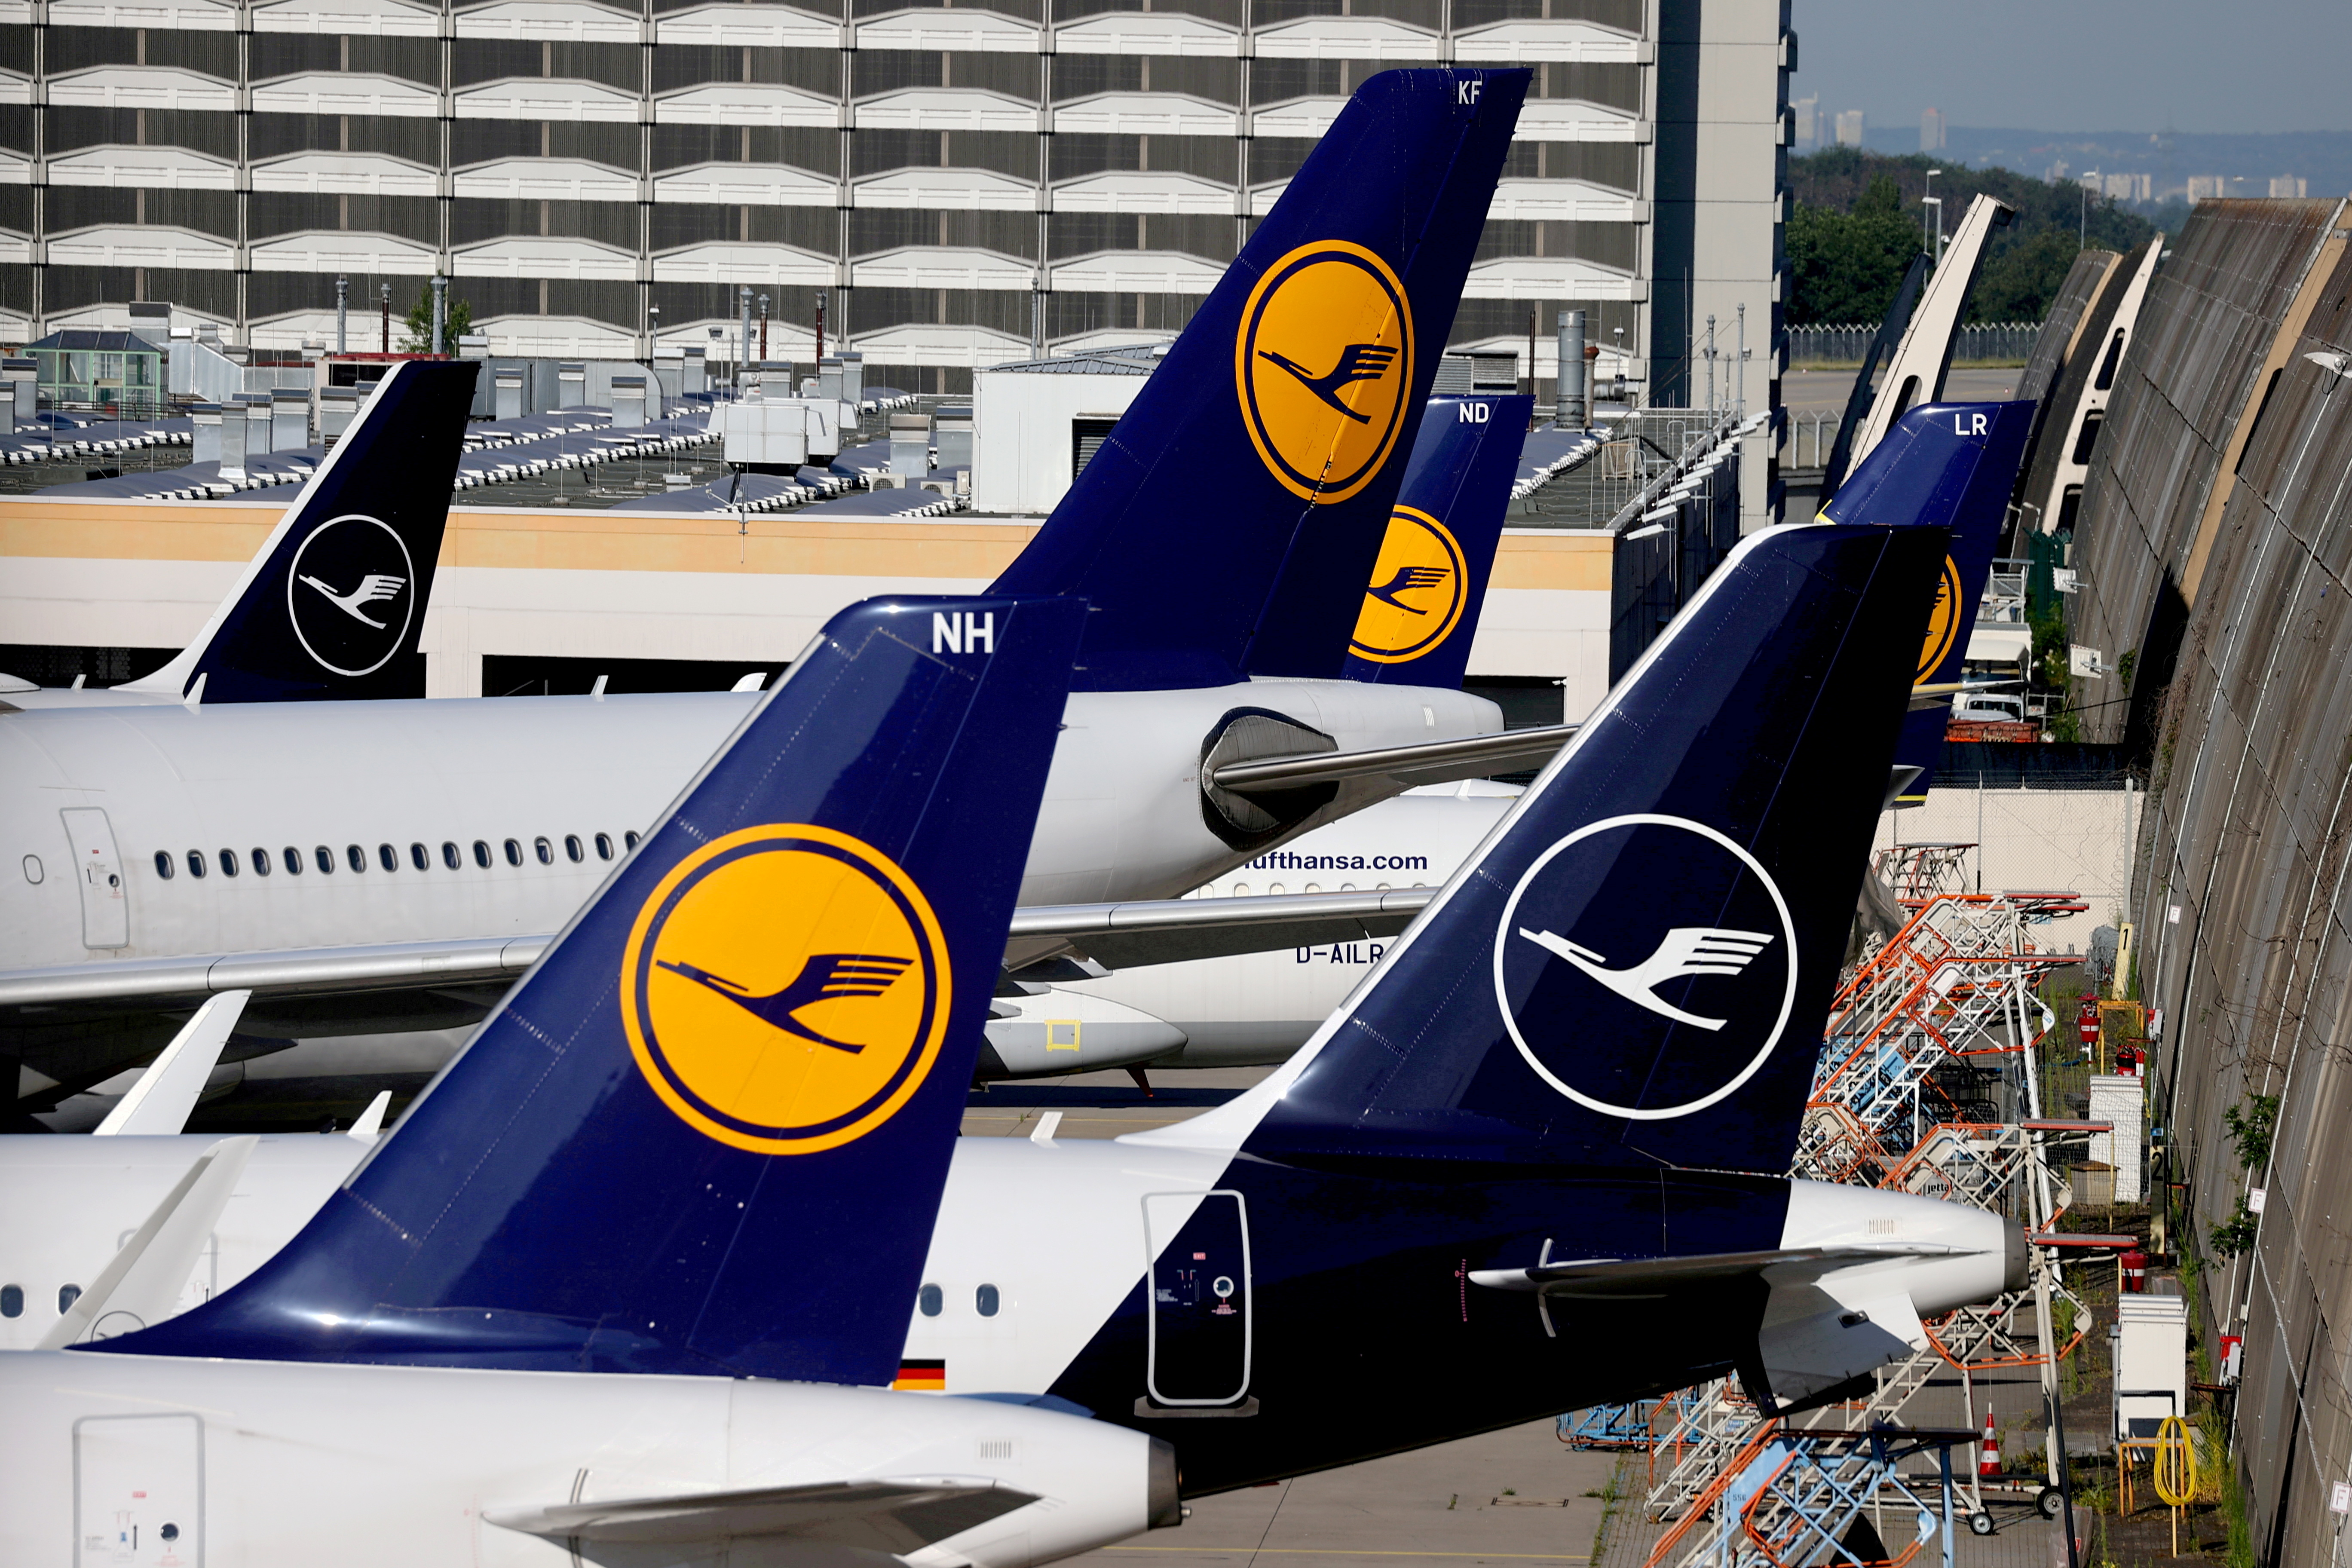 Lufthansa planes are seen parked on the tarmac of Frankfurt Airport, Germany June 25, 2020. REUTERS/Kai Pfaffenbach